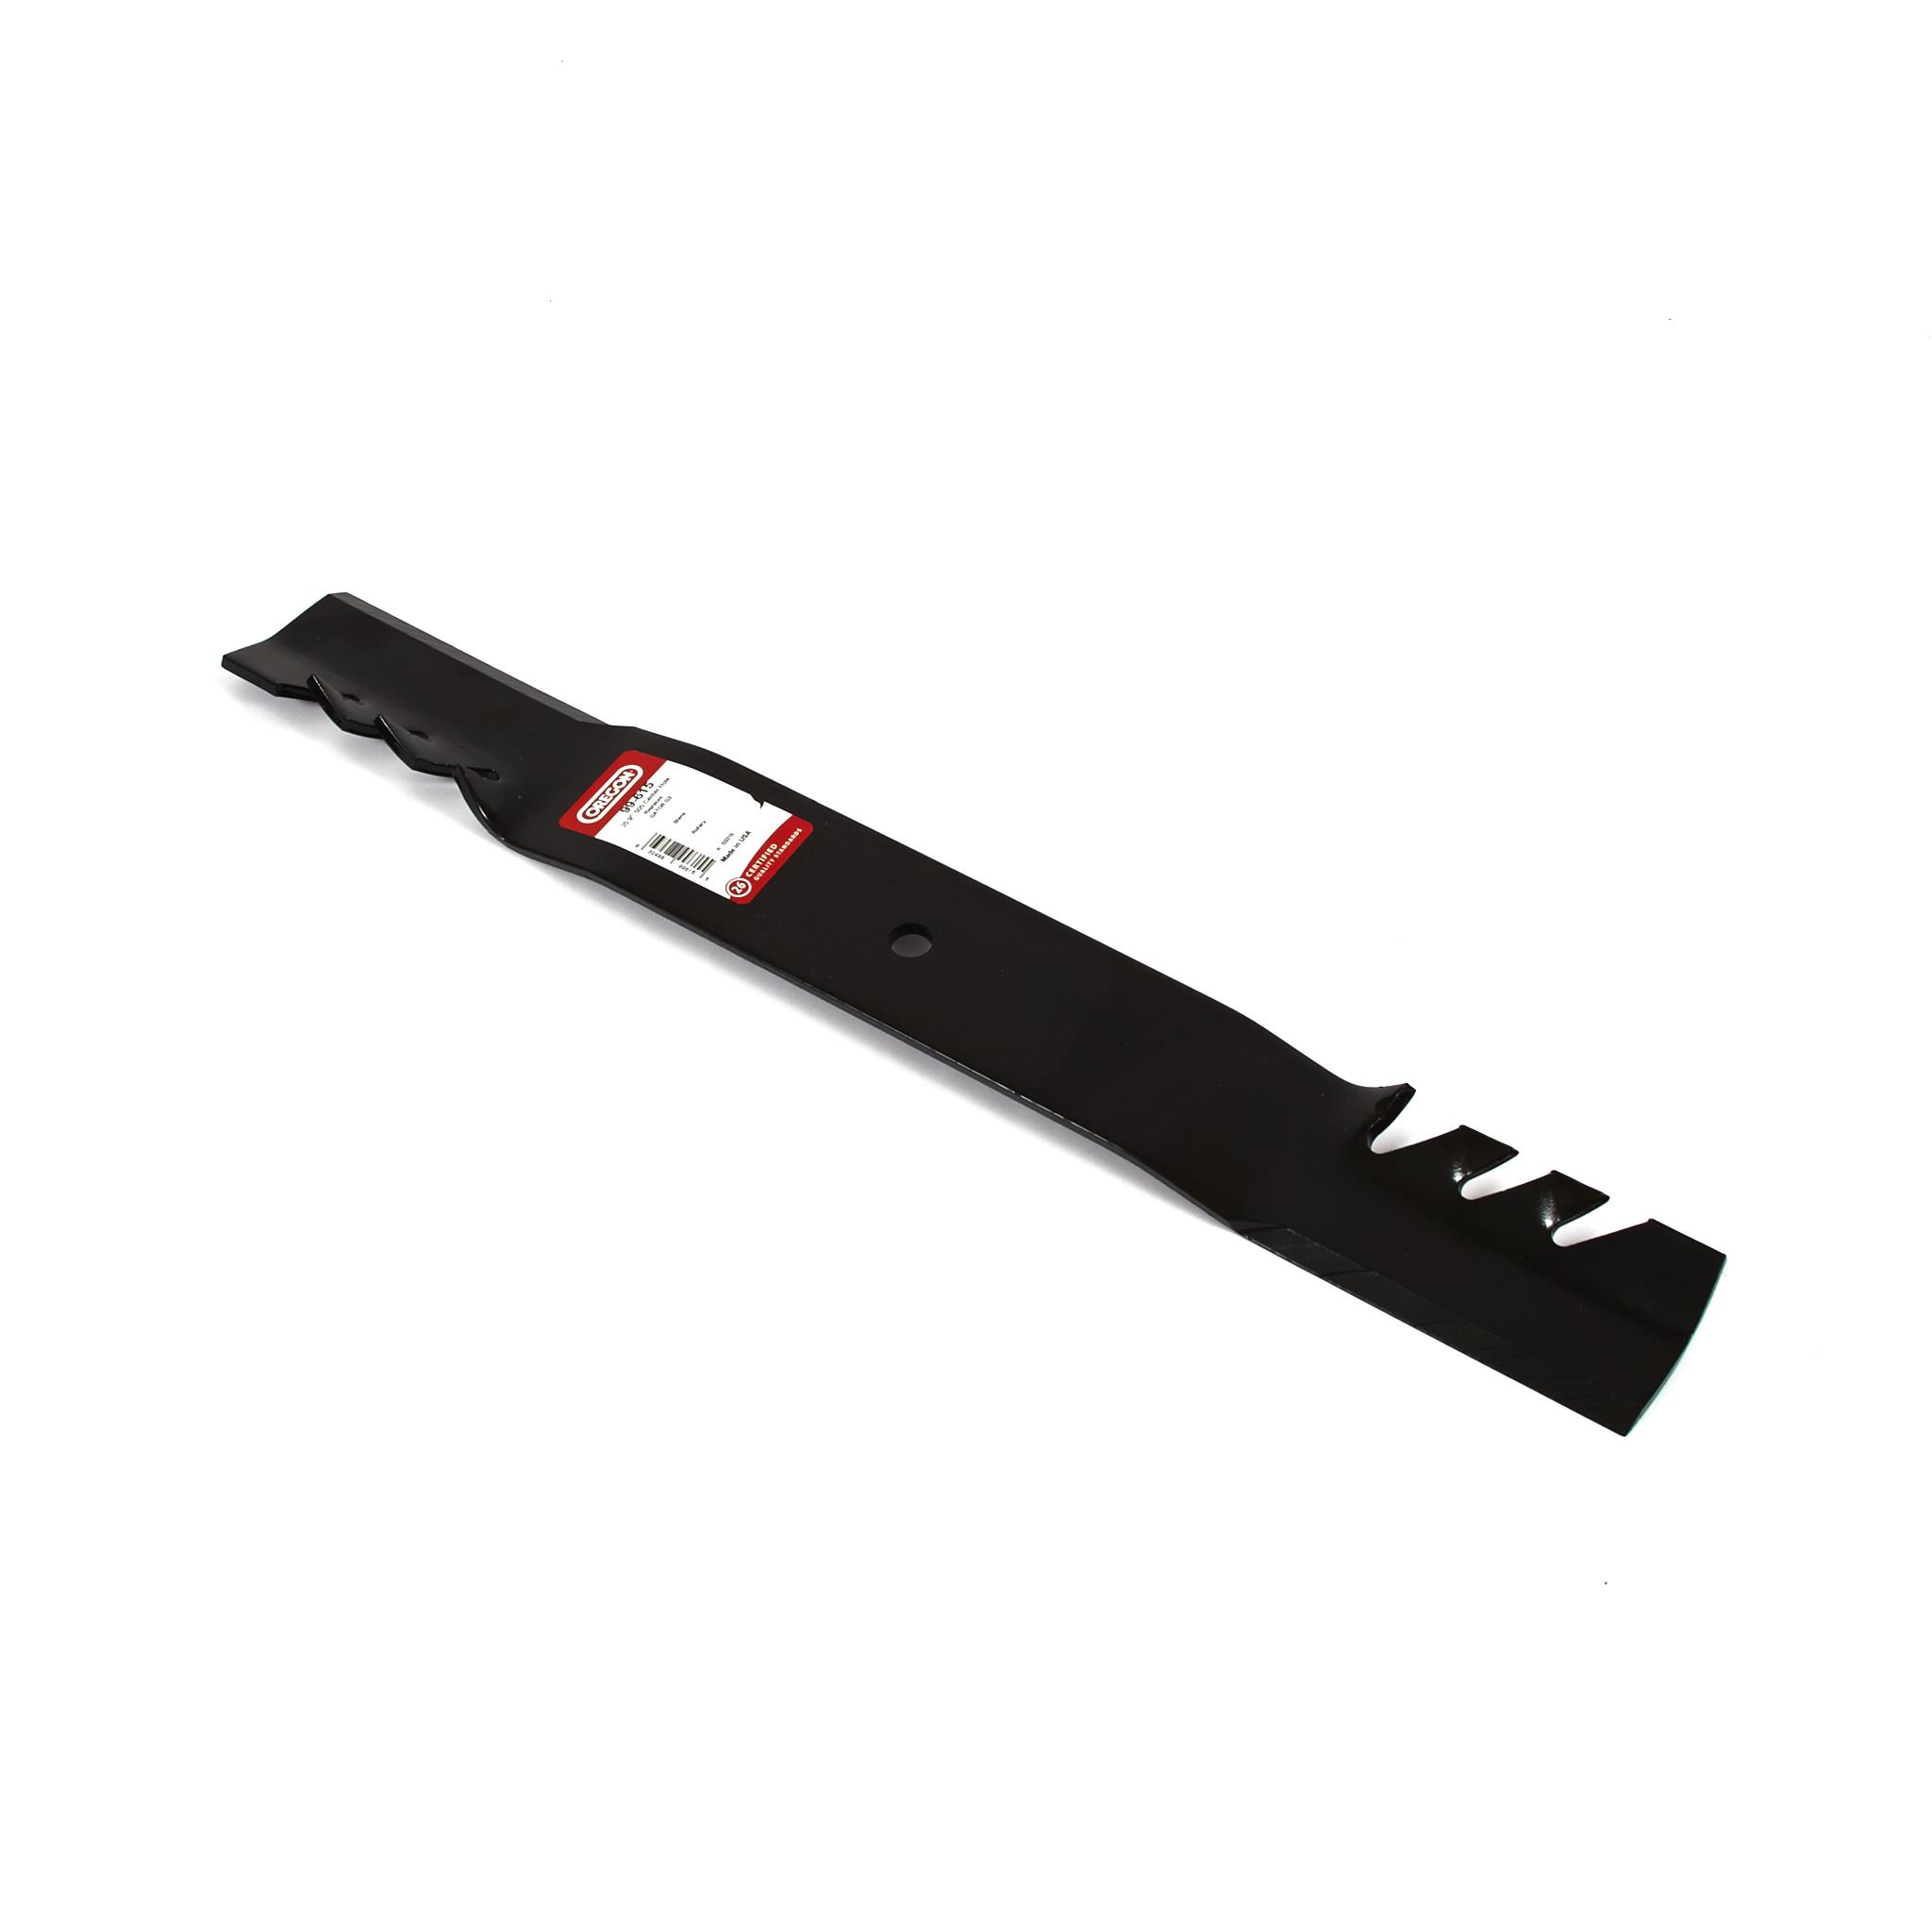 Gator G3 Mower Blade, 20-15/16" Compatible with Snapper - image 1 of 2